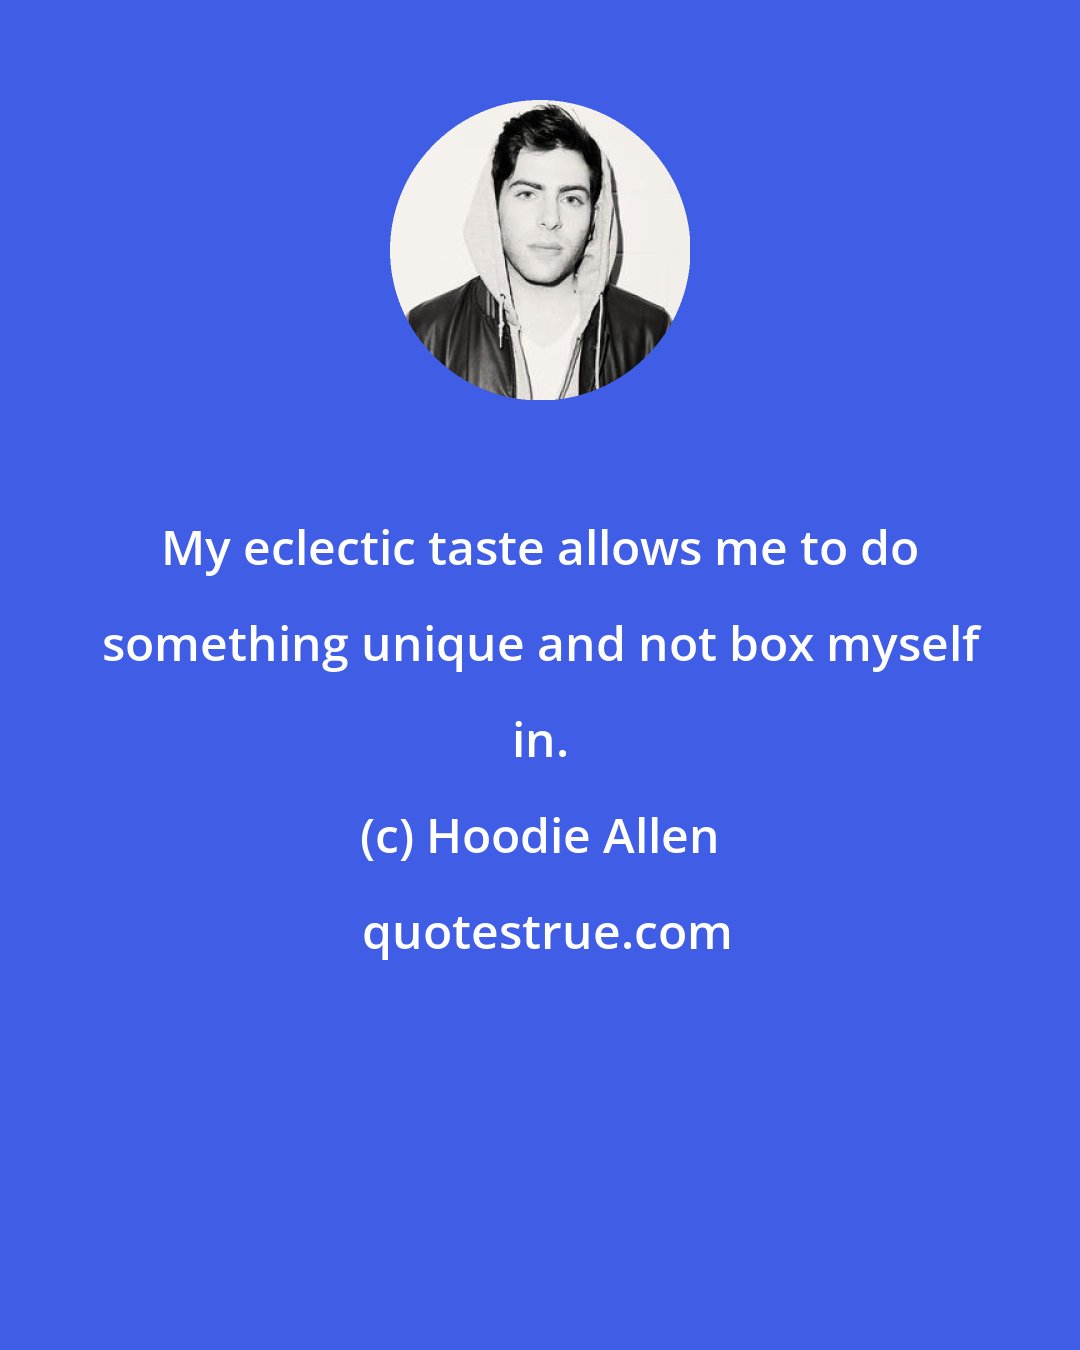 Hoodie Allen: My eclectic taste allows me to do something unique and not box myself in.